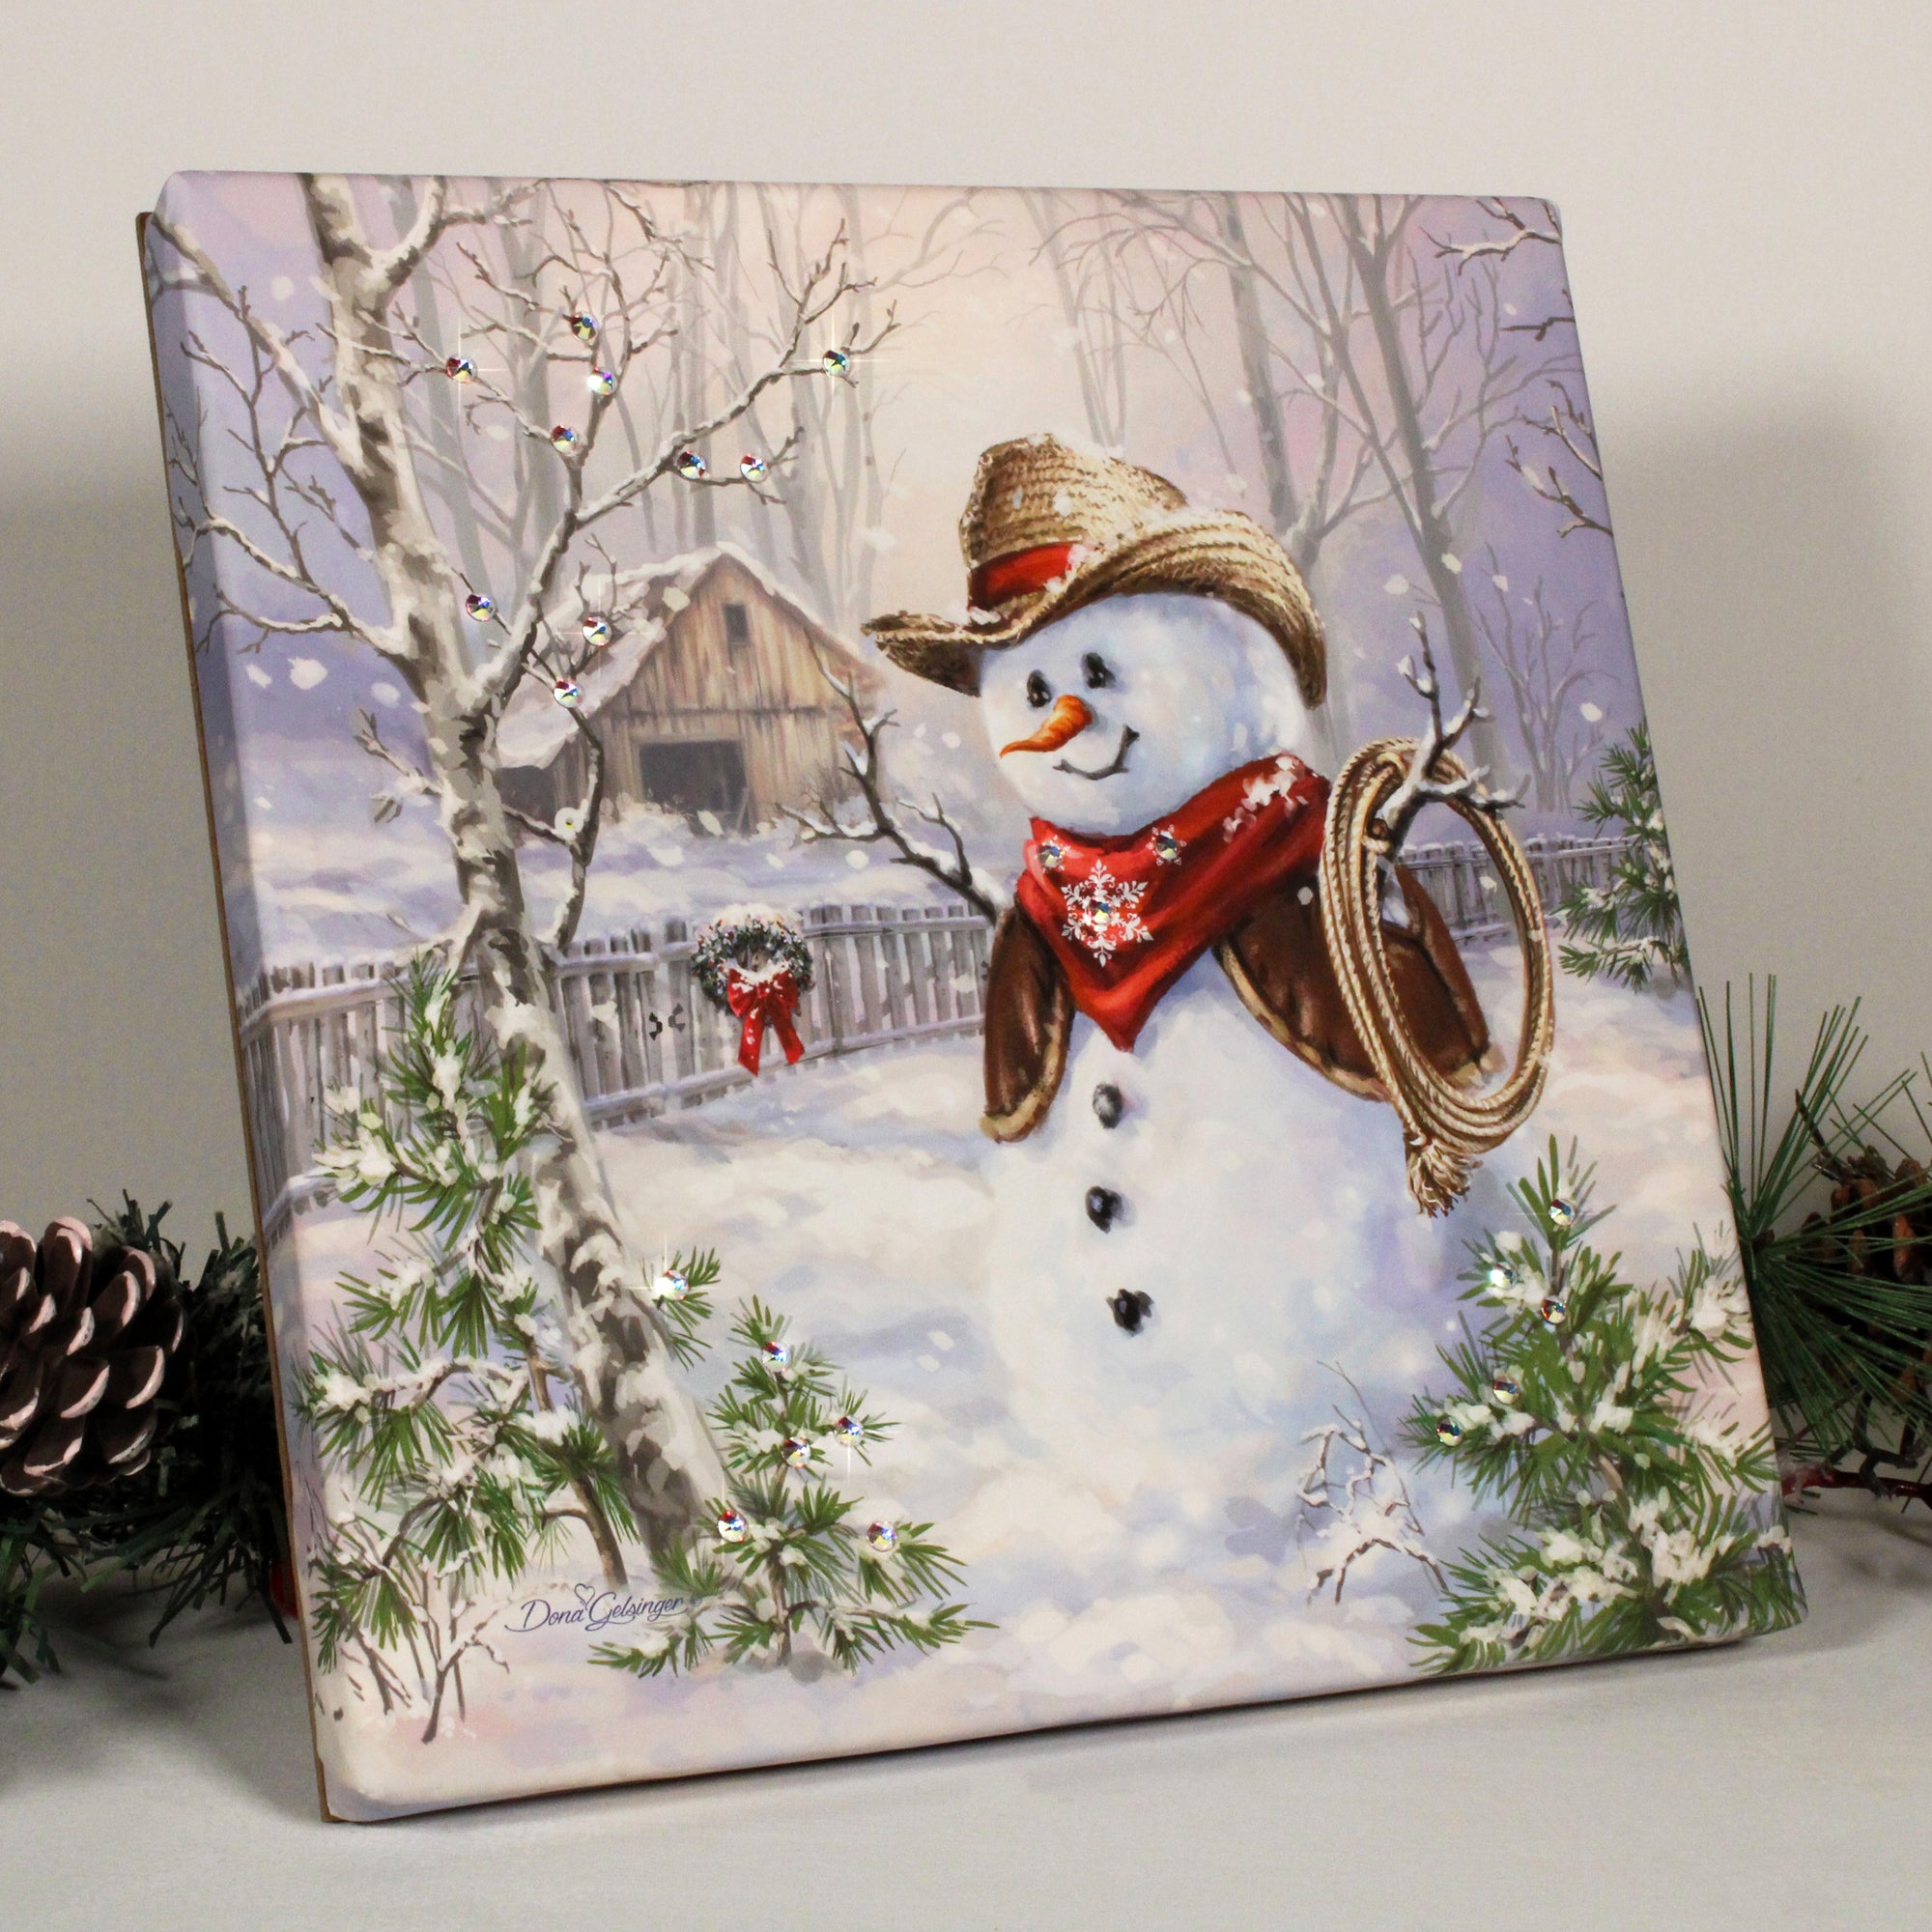 Saddle up and get ready to fall in love with Cowboy Frosty, the snowman with pizazz! This charming print captures the magic of winter and the romance of the Wild West all in one. Adorned with dazzling crystals, Cowboy Frosty brings a touch of sparkle to any space.